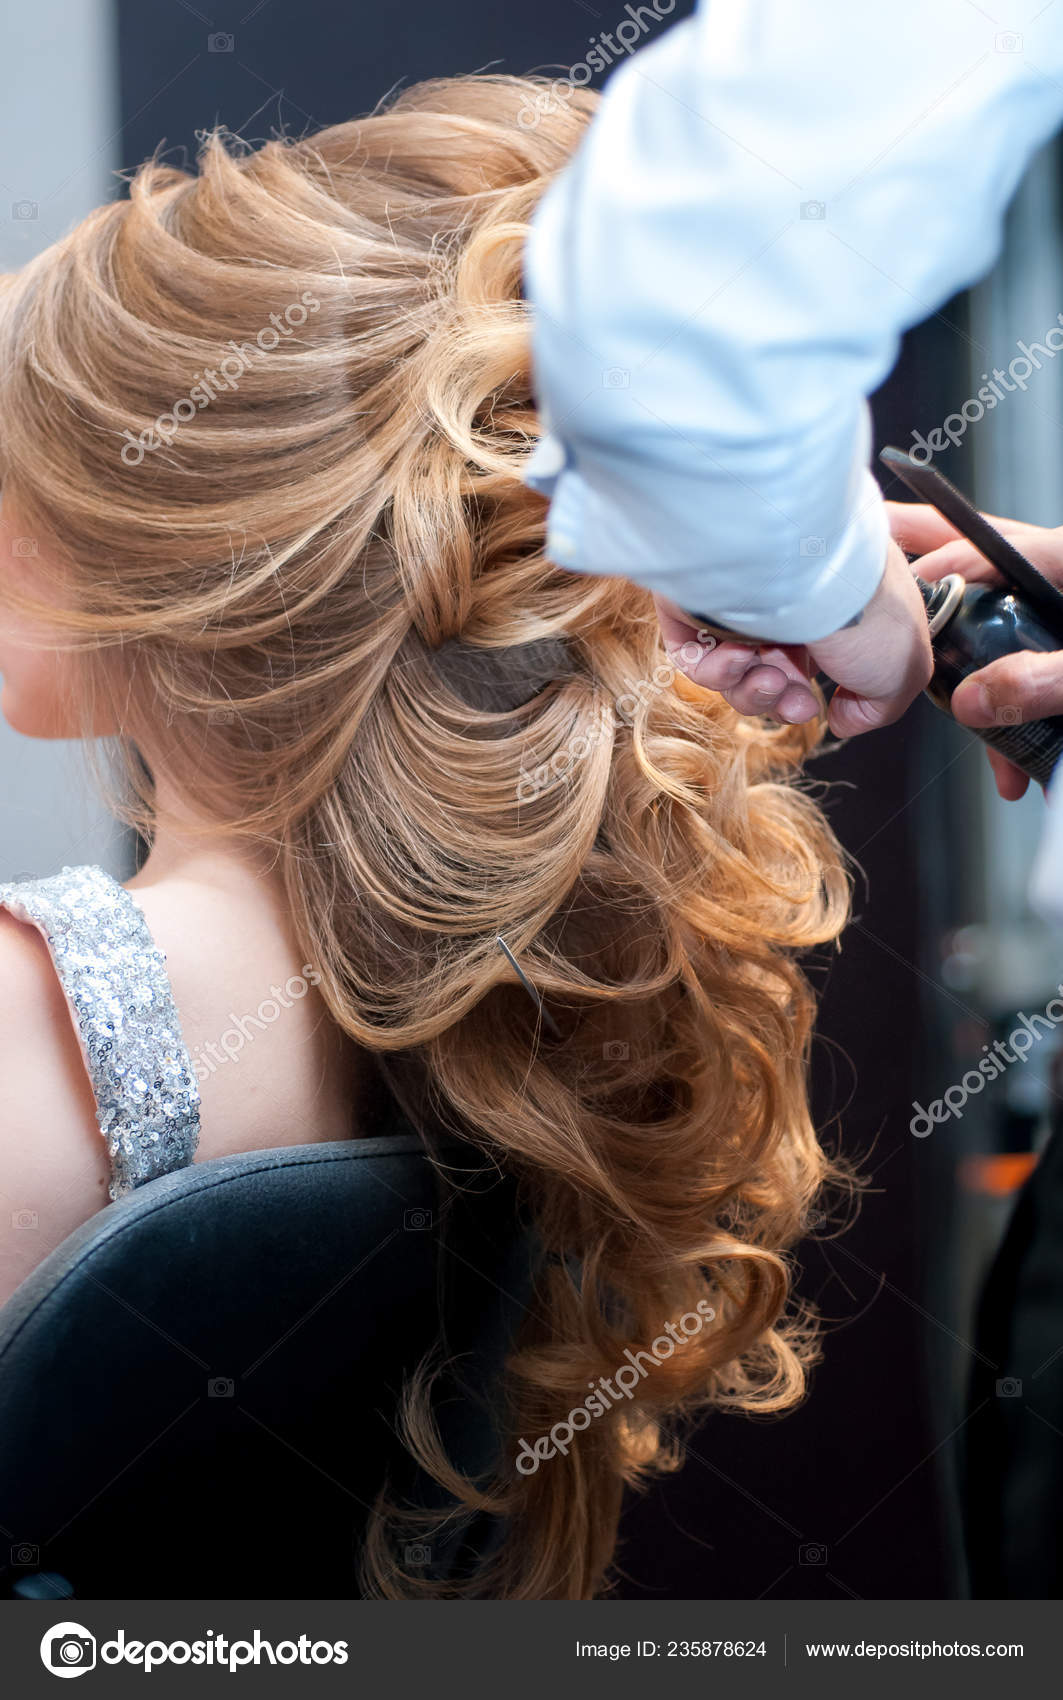 Process Evening Creating Hairstyles Girl Long Blond Hair Master Hairdresser  – Stock Editorial Photo © oksy001 #235878624